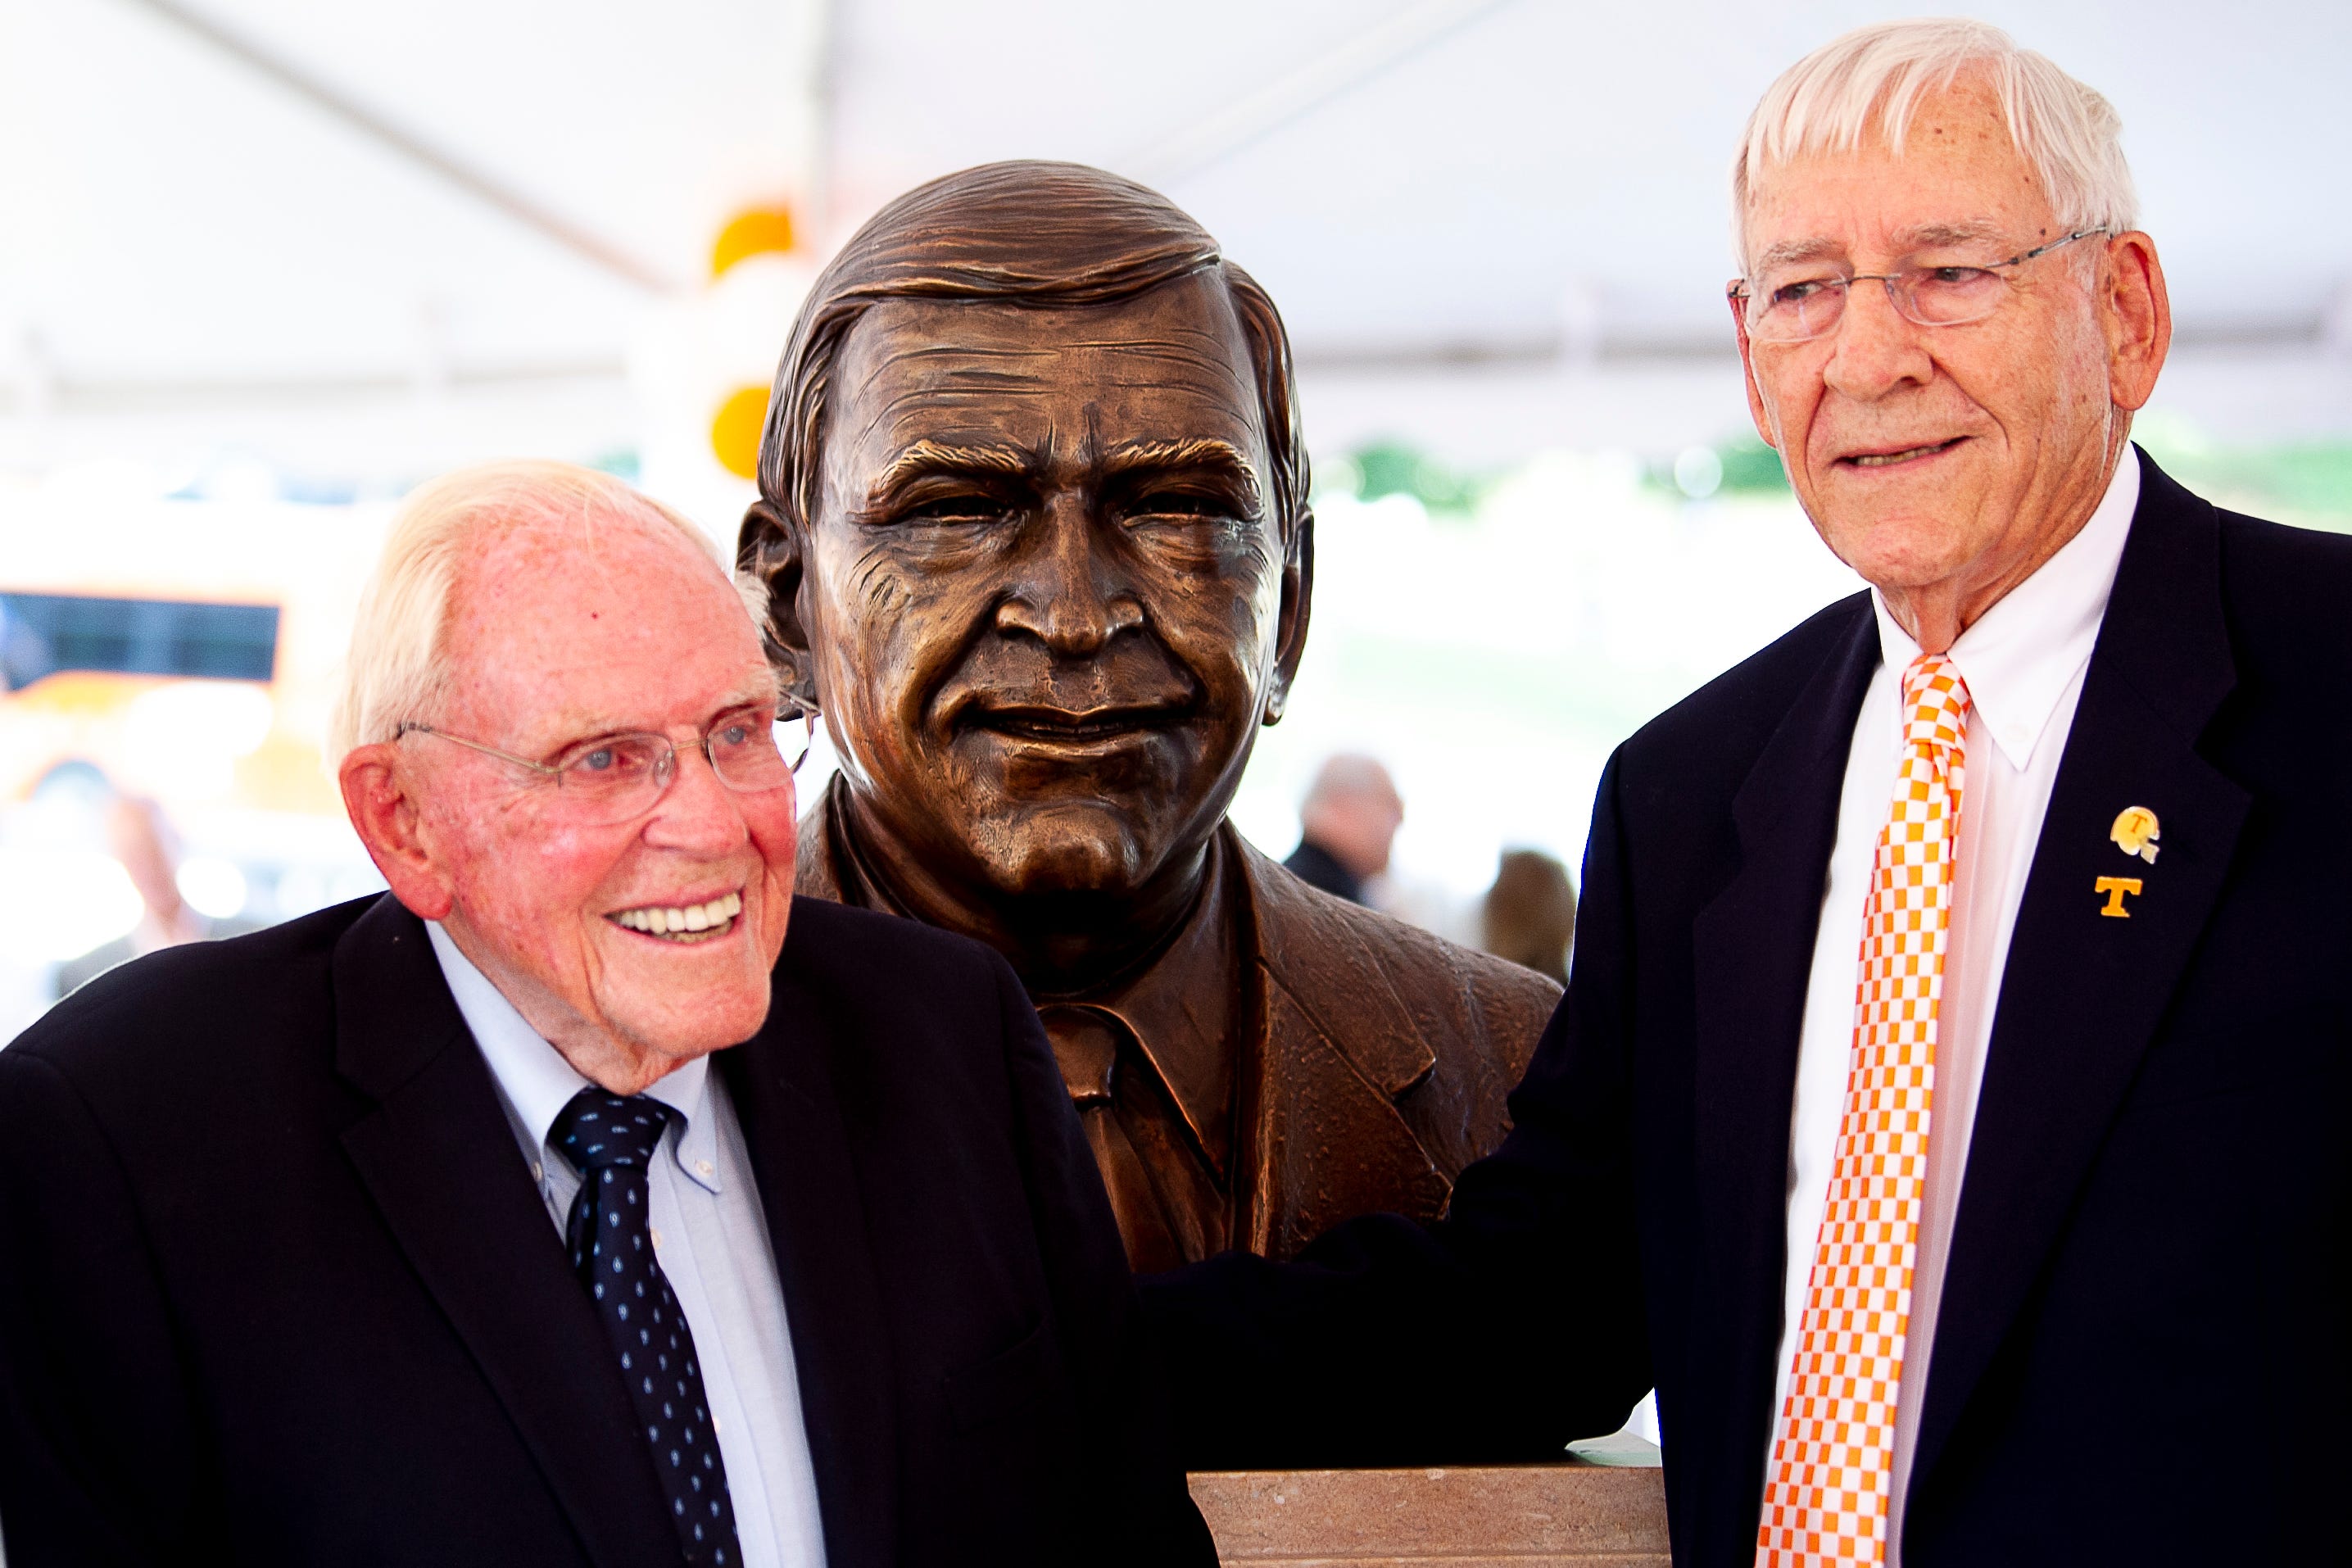 Former SEC commissioner Roy Kramer and former Tennessee coach and athletic director Doug Dickey stand beside a newly unveiled bust of him during a dedication ceremony of the Doug Dickey Hall of Fame Plaza at the Neyland-Thompson Sports Complex in Knoxville, Tennessee on Friday, October 4, 2019. Dickey led UT to its second SEC title in 1969 and served as the Vols' Director of Athletics from 1986 to 2003.